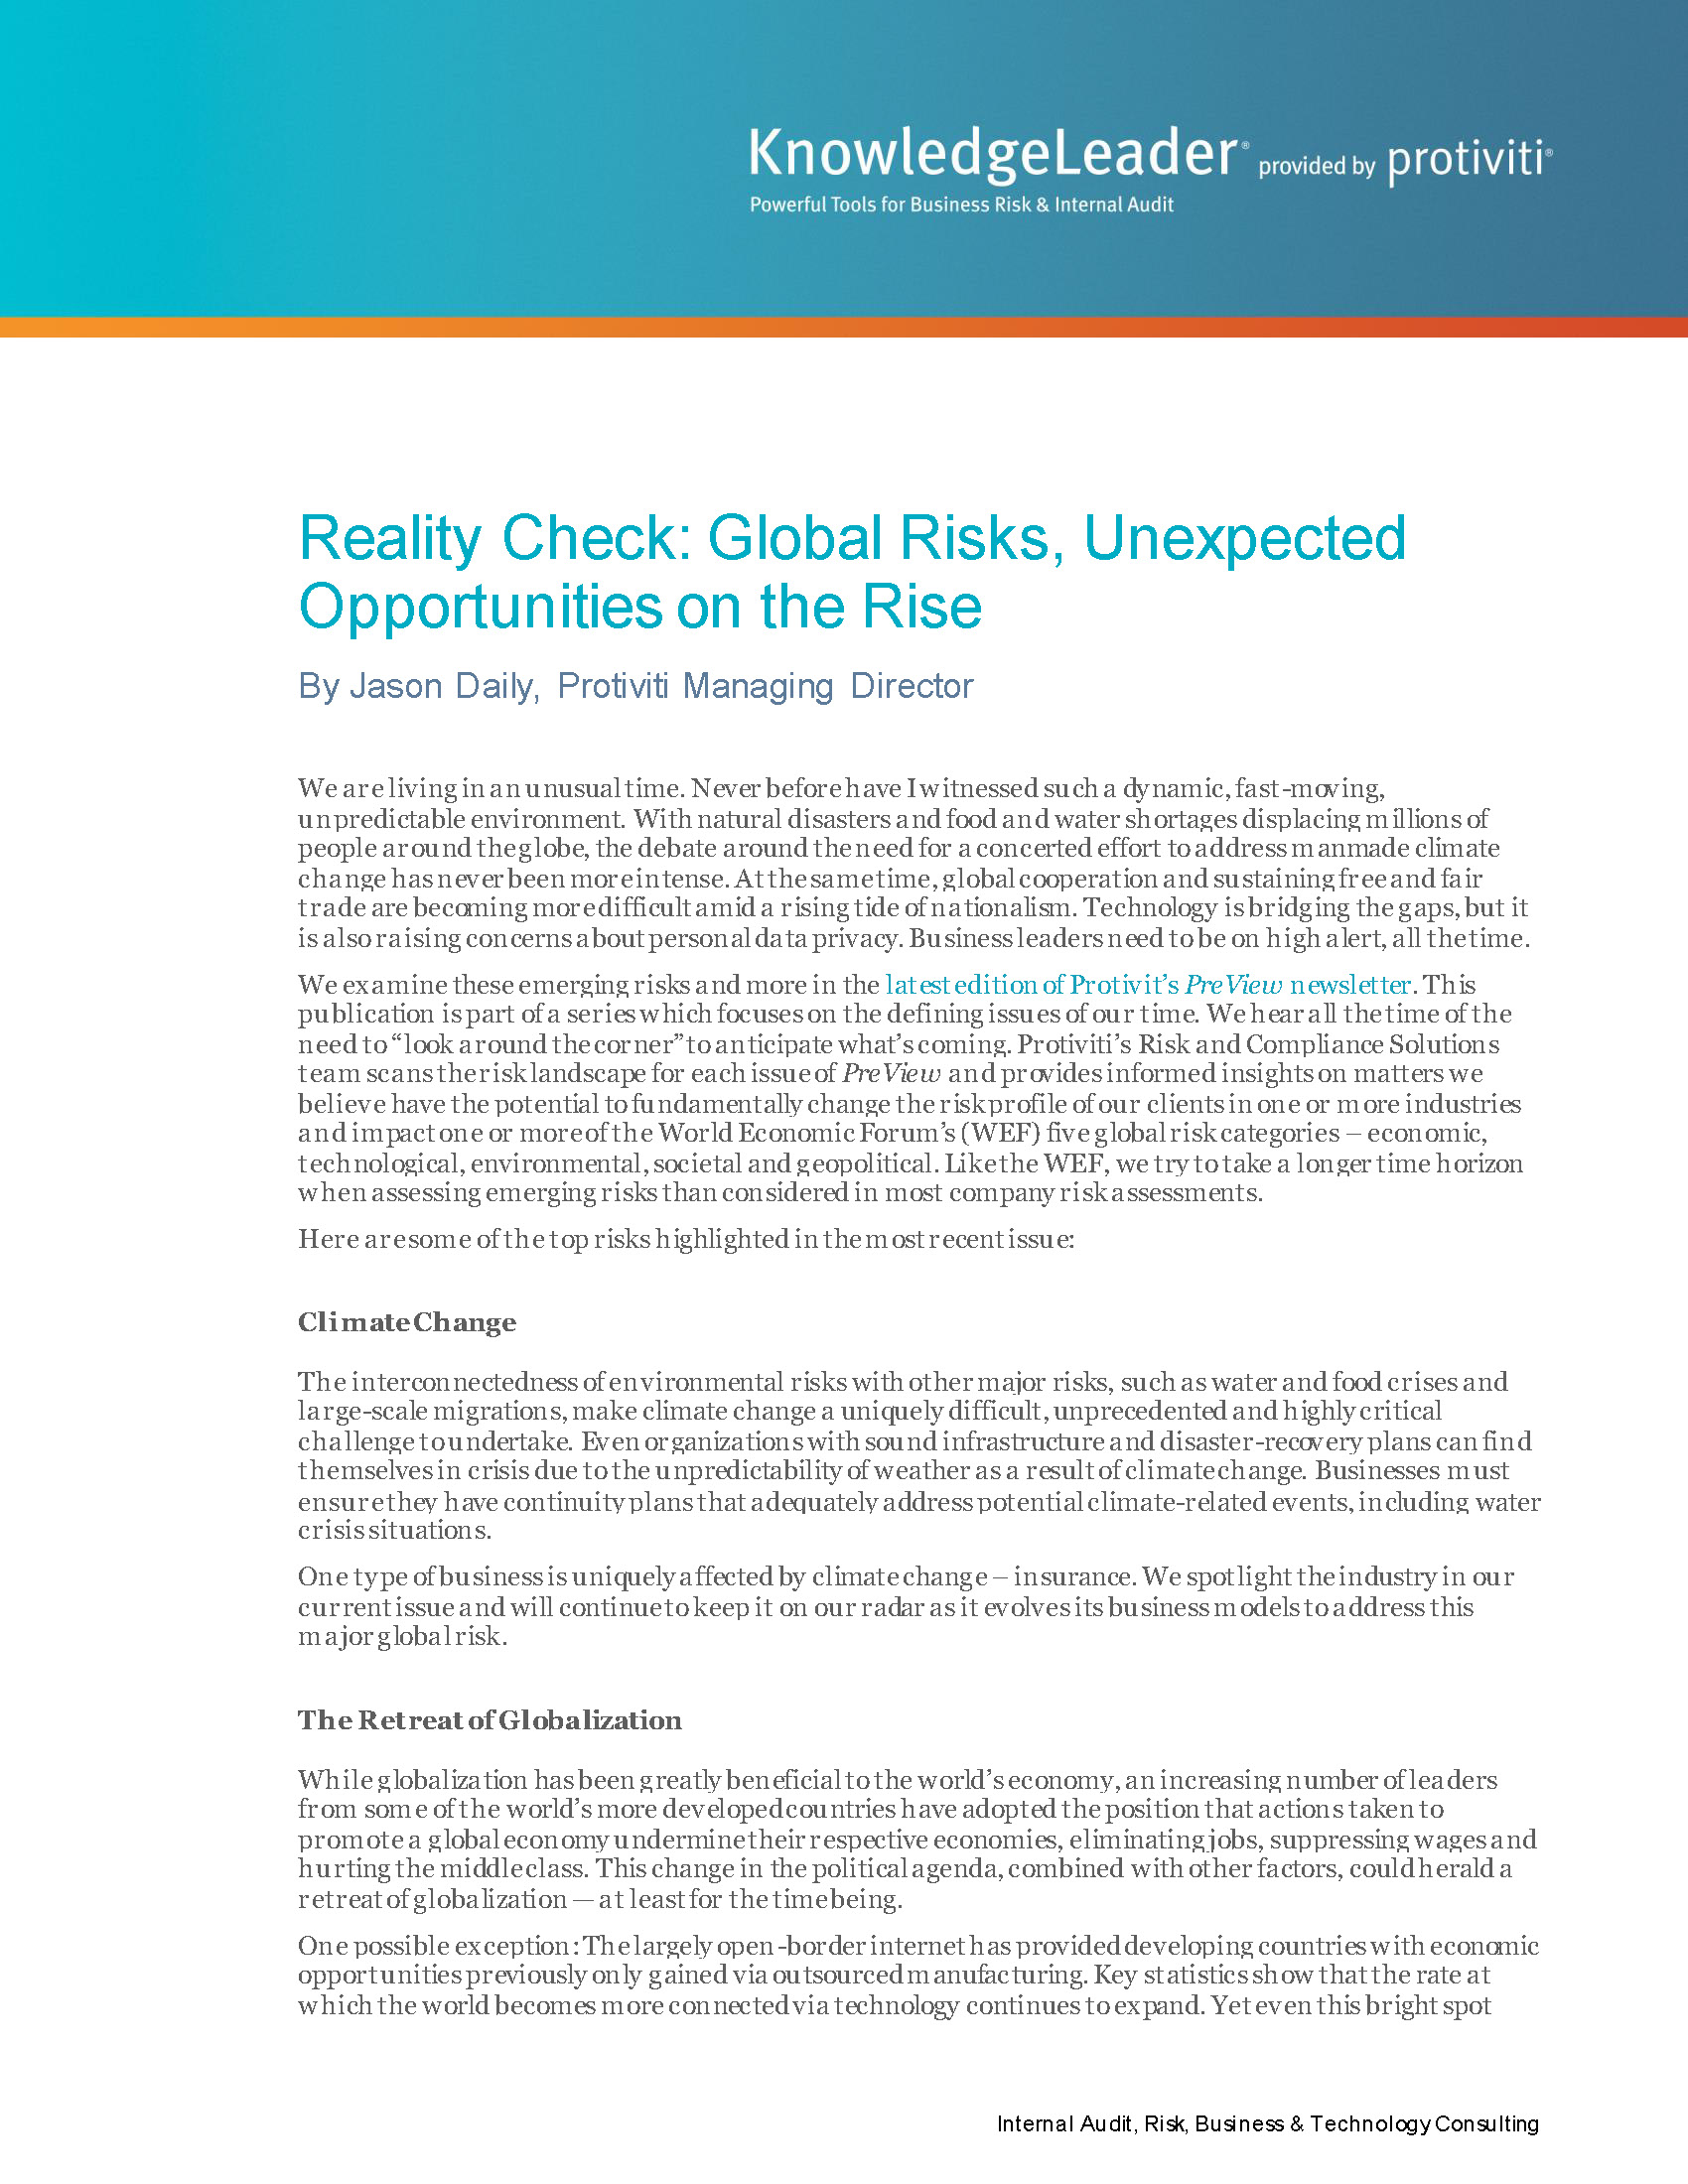 Screenshot of the first page of Reality Check Global Risks, Unexpected Opportunities on the Rise